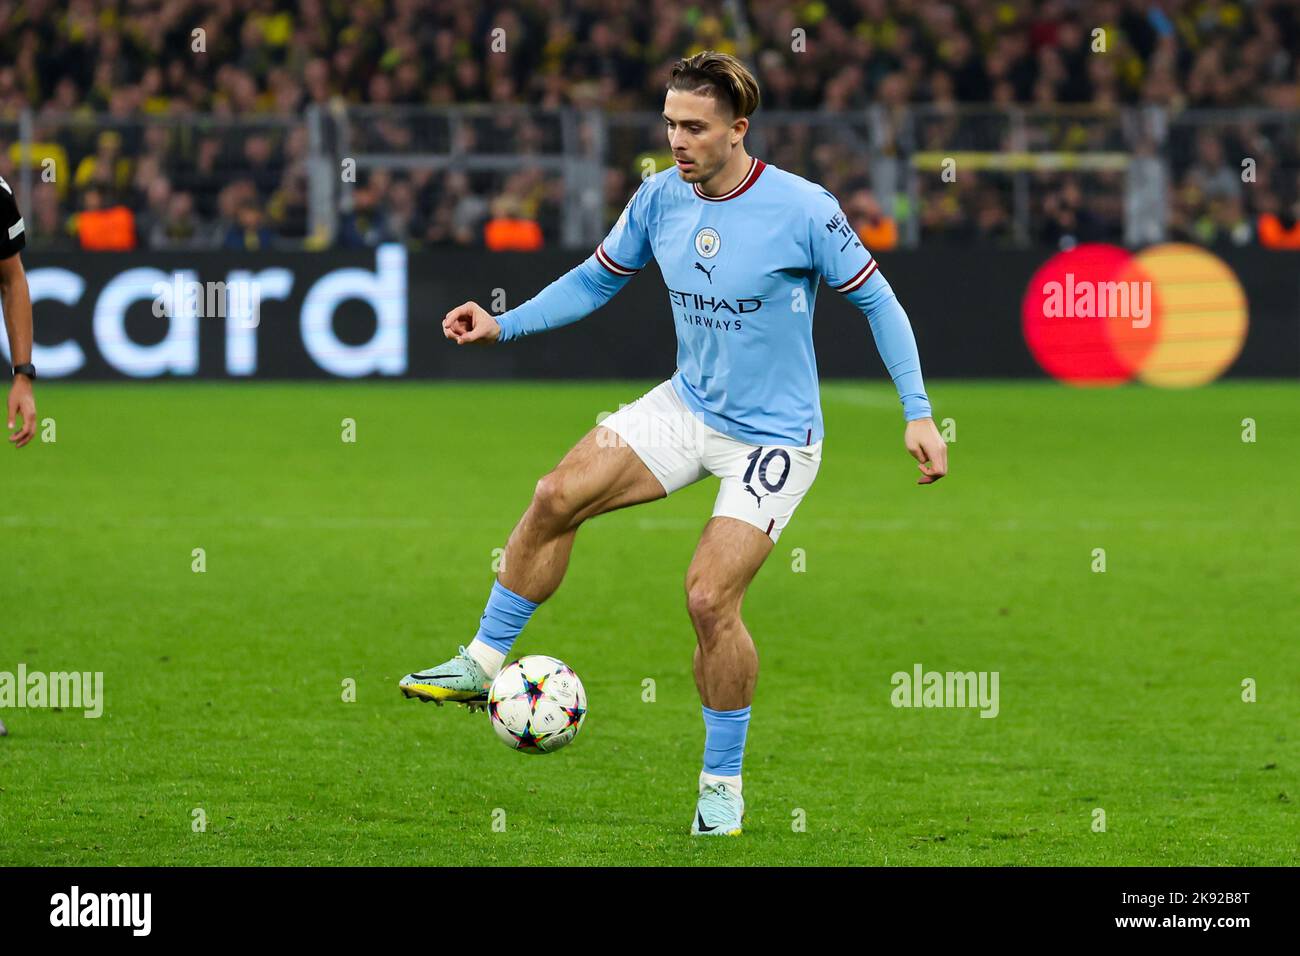 DORTMUND, GERMANY - OCTOBER 25: Jack Grealish of Manchester City during the UEFA Champions League group G match between Borussia Dortmund and Manchester City at Signal Iduna Park on October 25, 2022 in Dortmund, Germany (Photo by Marcel ter Bals/Orange Pictures) Stock Photo